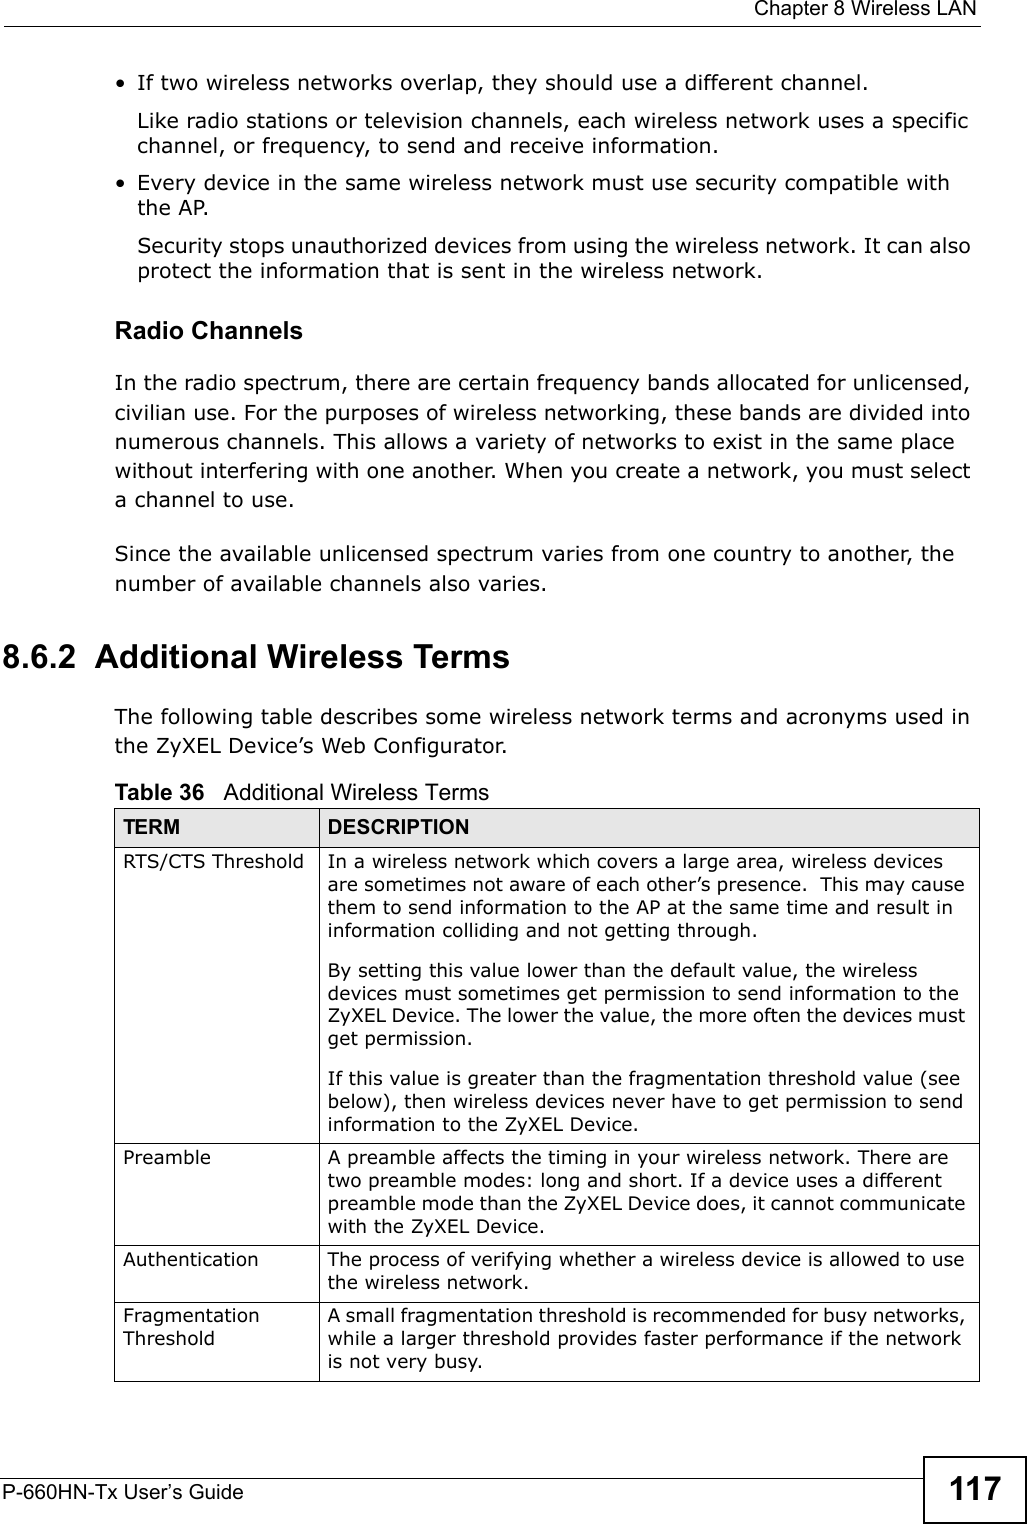  Chapter 8 Wireless LANP-660HN-Tx User’s Guide 117•If two wireless networks overlap, they should use a different channel.Like radio stations or television channels, each wireless network uses a specific channel, or frequency, to send and receive information.• Every device in the same wireless network must use security compatible with the AP.Security stops unauthorized devices from using the wireless network. It can also protect the information that is sent in the wireless network.Radio ChannelsIn the radio spectrum, there are certain frequency bands allocated for unlicensed, civilian use. For the purposes of wireless networking, these bands are divided into numerous channels. This allows a variety of networks to exist in the same place without interfering with one another. When you create a network, you must select a channel to use. Since the available unlicensed spectrum varies from one country to another, the number of available channels also varies. 8.6.2  Additional Wireless TermsThe following table describes some wireless network terms and acronyms used in the ZyXEL Device’s Web Configurator.Table 36   Additional Wireless TermsTERM DESCRIPTIONRTS/CTS Threshold In a wireless network which covers a large area, wireless devices are sometimes not aware of each other’s presence.  This may cause them to send information to the AP at the same time and result in information colliding and not getting through.By setting this value lower than the default value, the wireless devices must sometimes get permission to send information to the ZyXEL Device. The lower the value, the more often the devices must get permission.If this value is greater than the fragmentation threshold value (see below), then wireless devices never have to get permission to send information to the ZyXEL Device.Preamble A preamble affects the timing in your wireless network. There are two preamble modes: long and short. If a device uses a different preamble mode than the ZyXEL Device does, it cannot communicate with the ZyXEL Device.Authentication The process of verifying whether a wireless device is allowed to use the wireless network.Fragmentation ThresholdA small fragmentation threshold is recommended for busy networks, while a larger threshold provides faster performance if the network is not very busy.